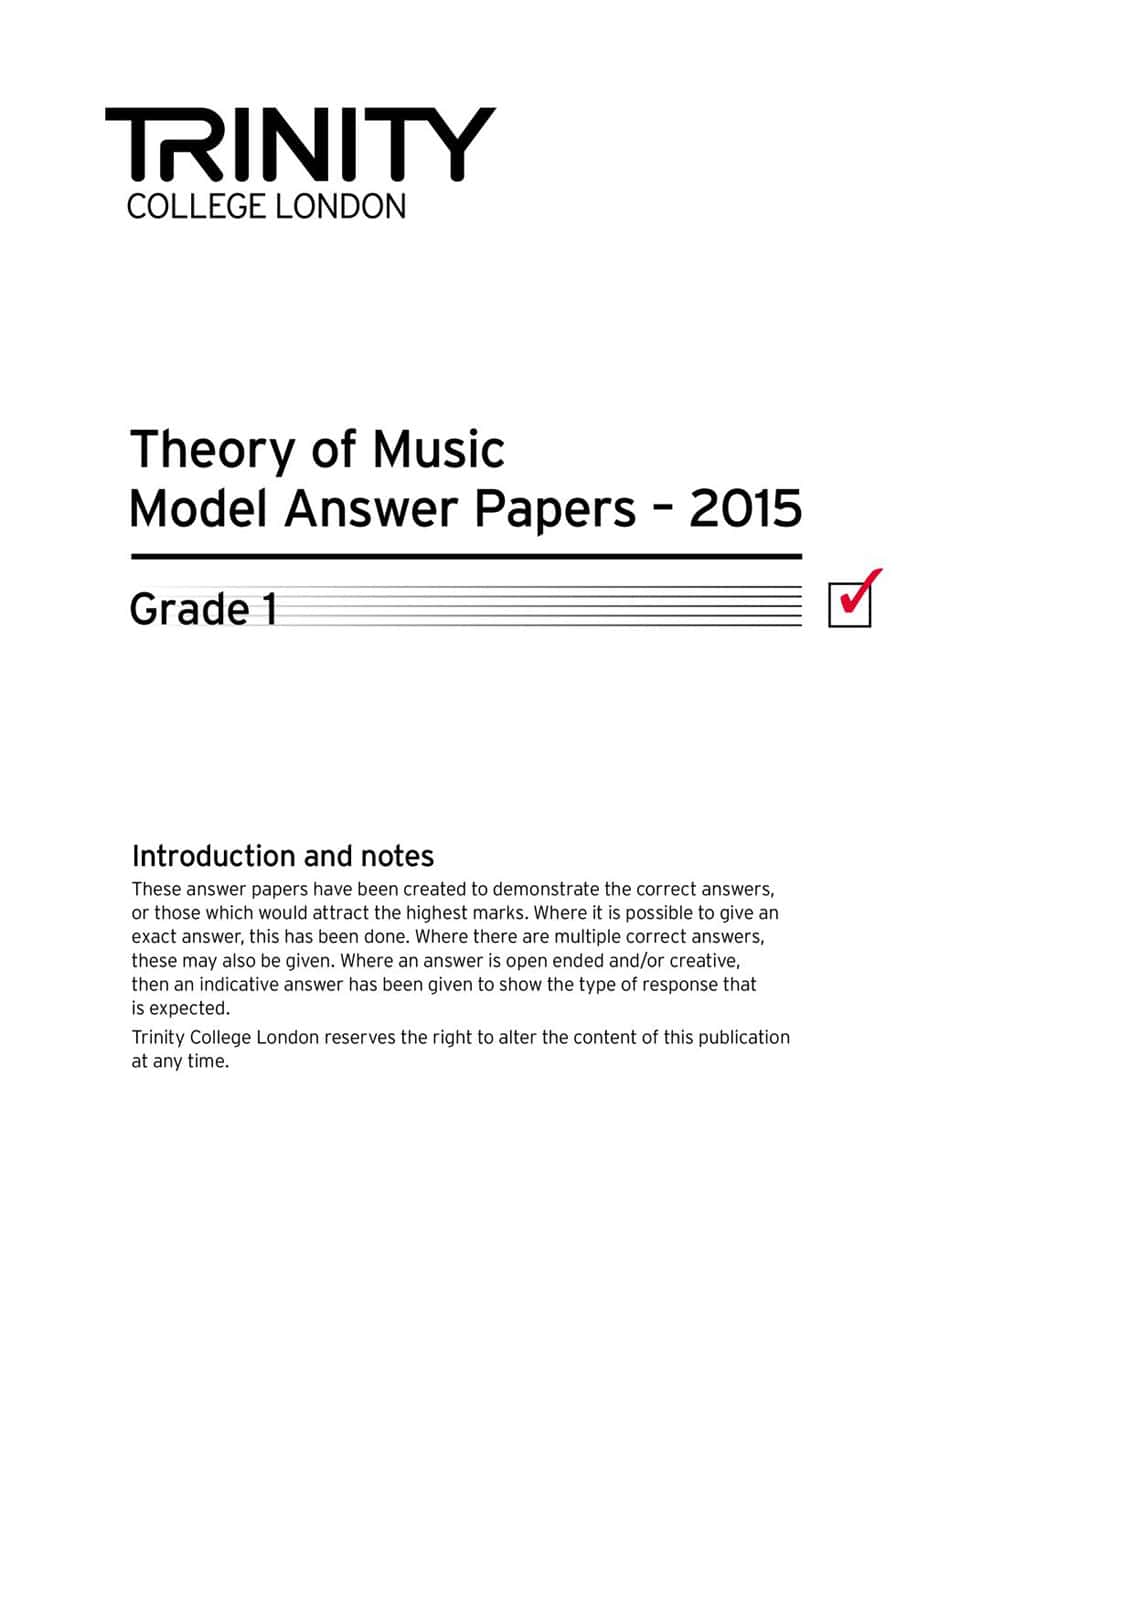 TRINITY GUILDHALL TRINITY COLLEGE LONDON THEORY MODEL ANSWERS PAPER (2015) GRADE 1 ( ALL INSTRUMENTS)